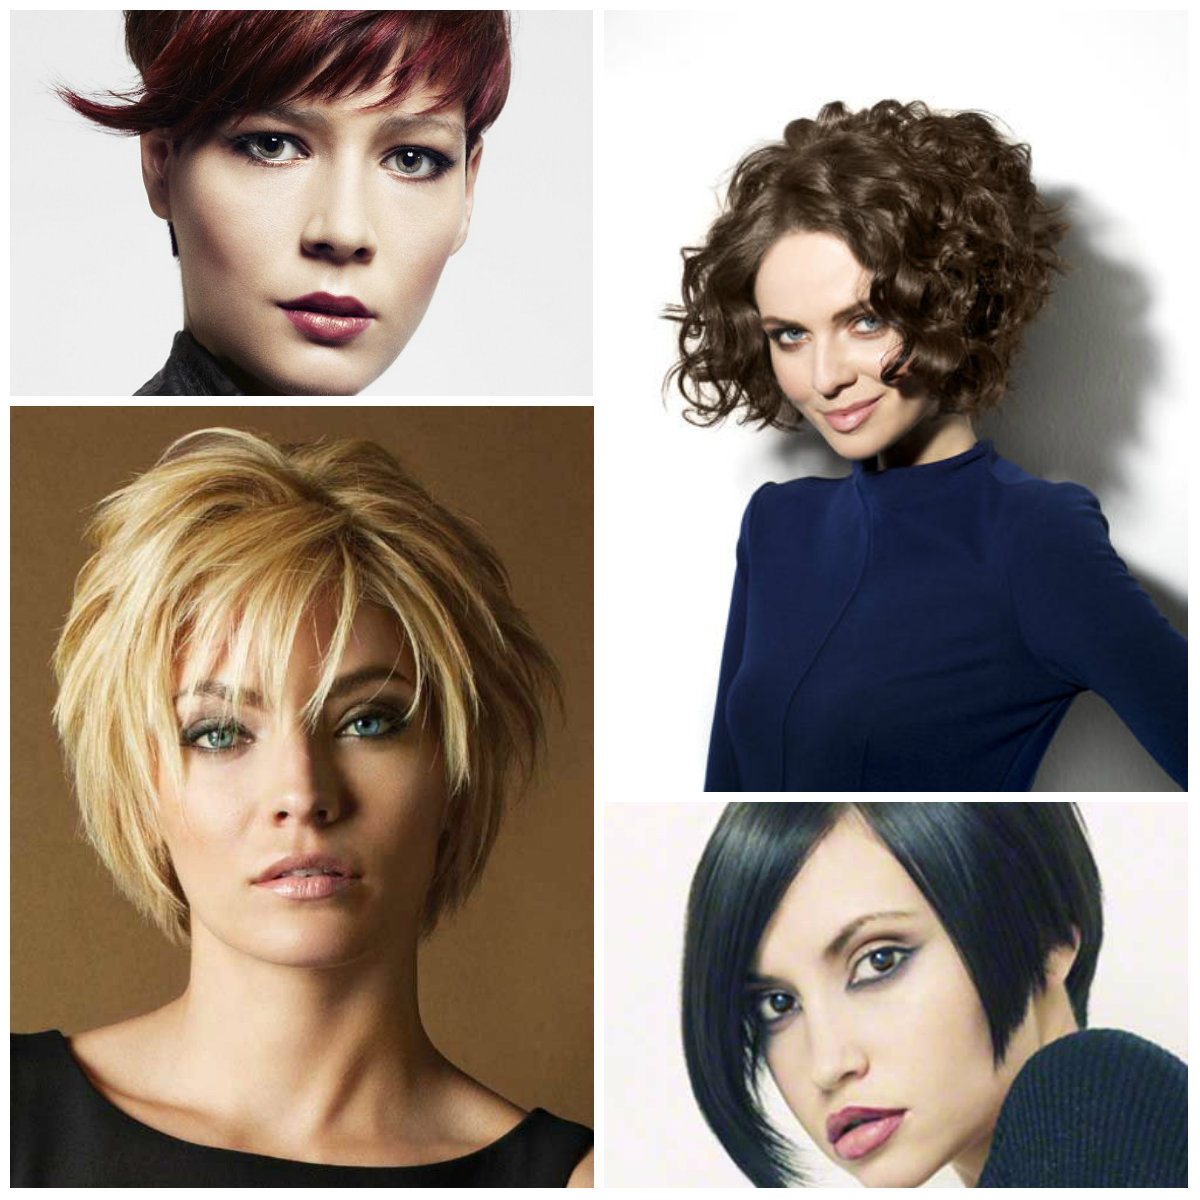 Hairstyles Latest Short Hairstyles With Layers The Number Of